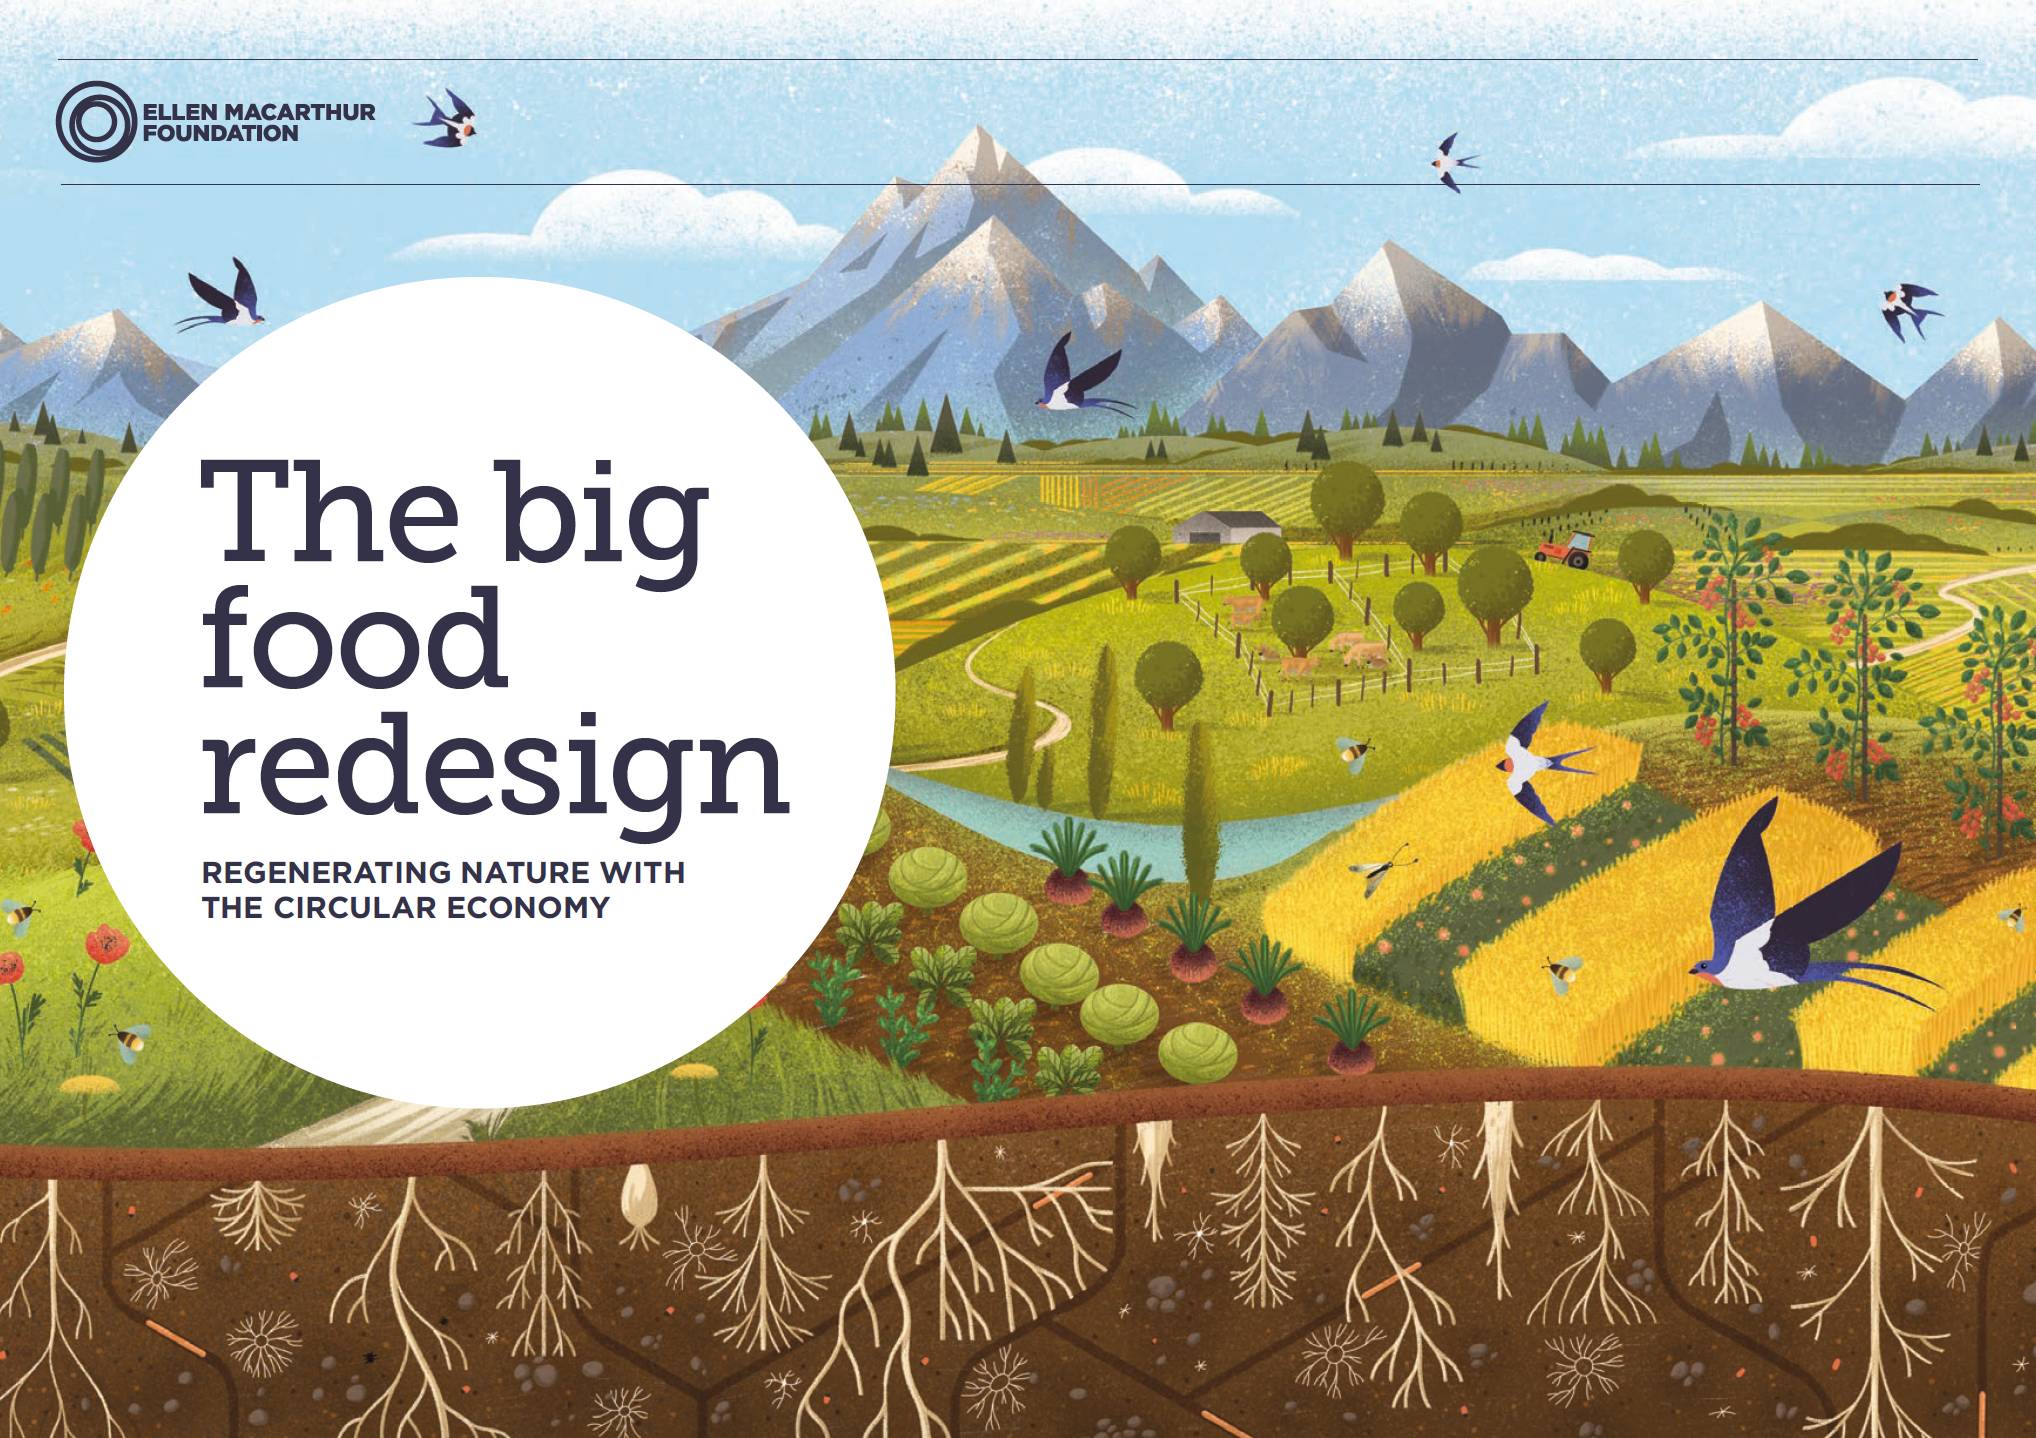 The Big Food Redesign